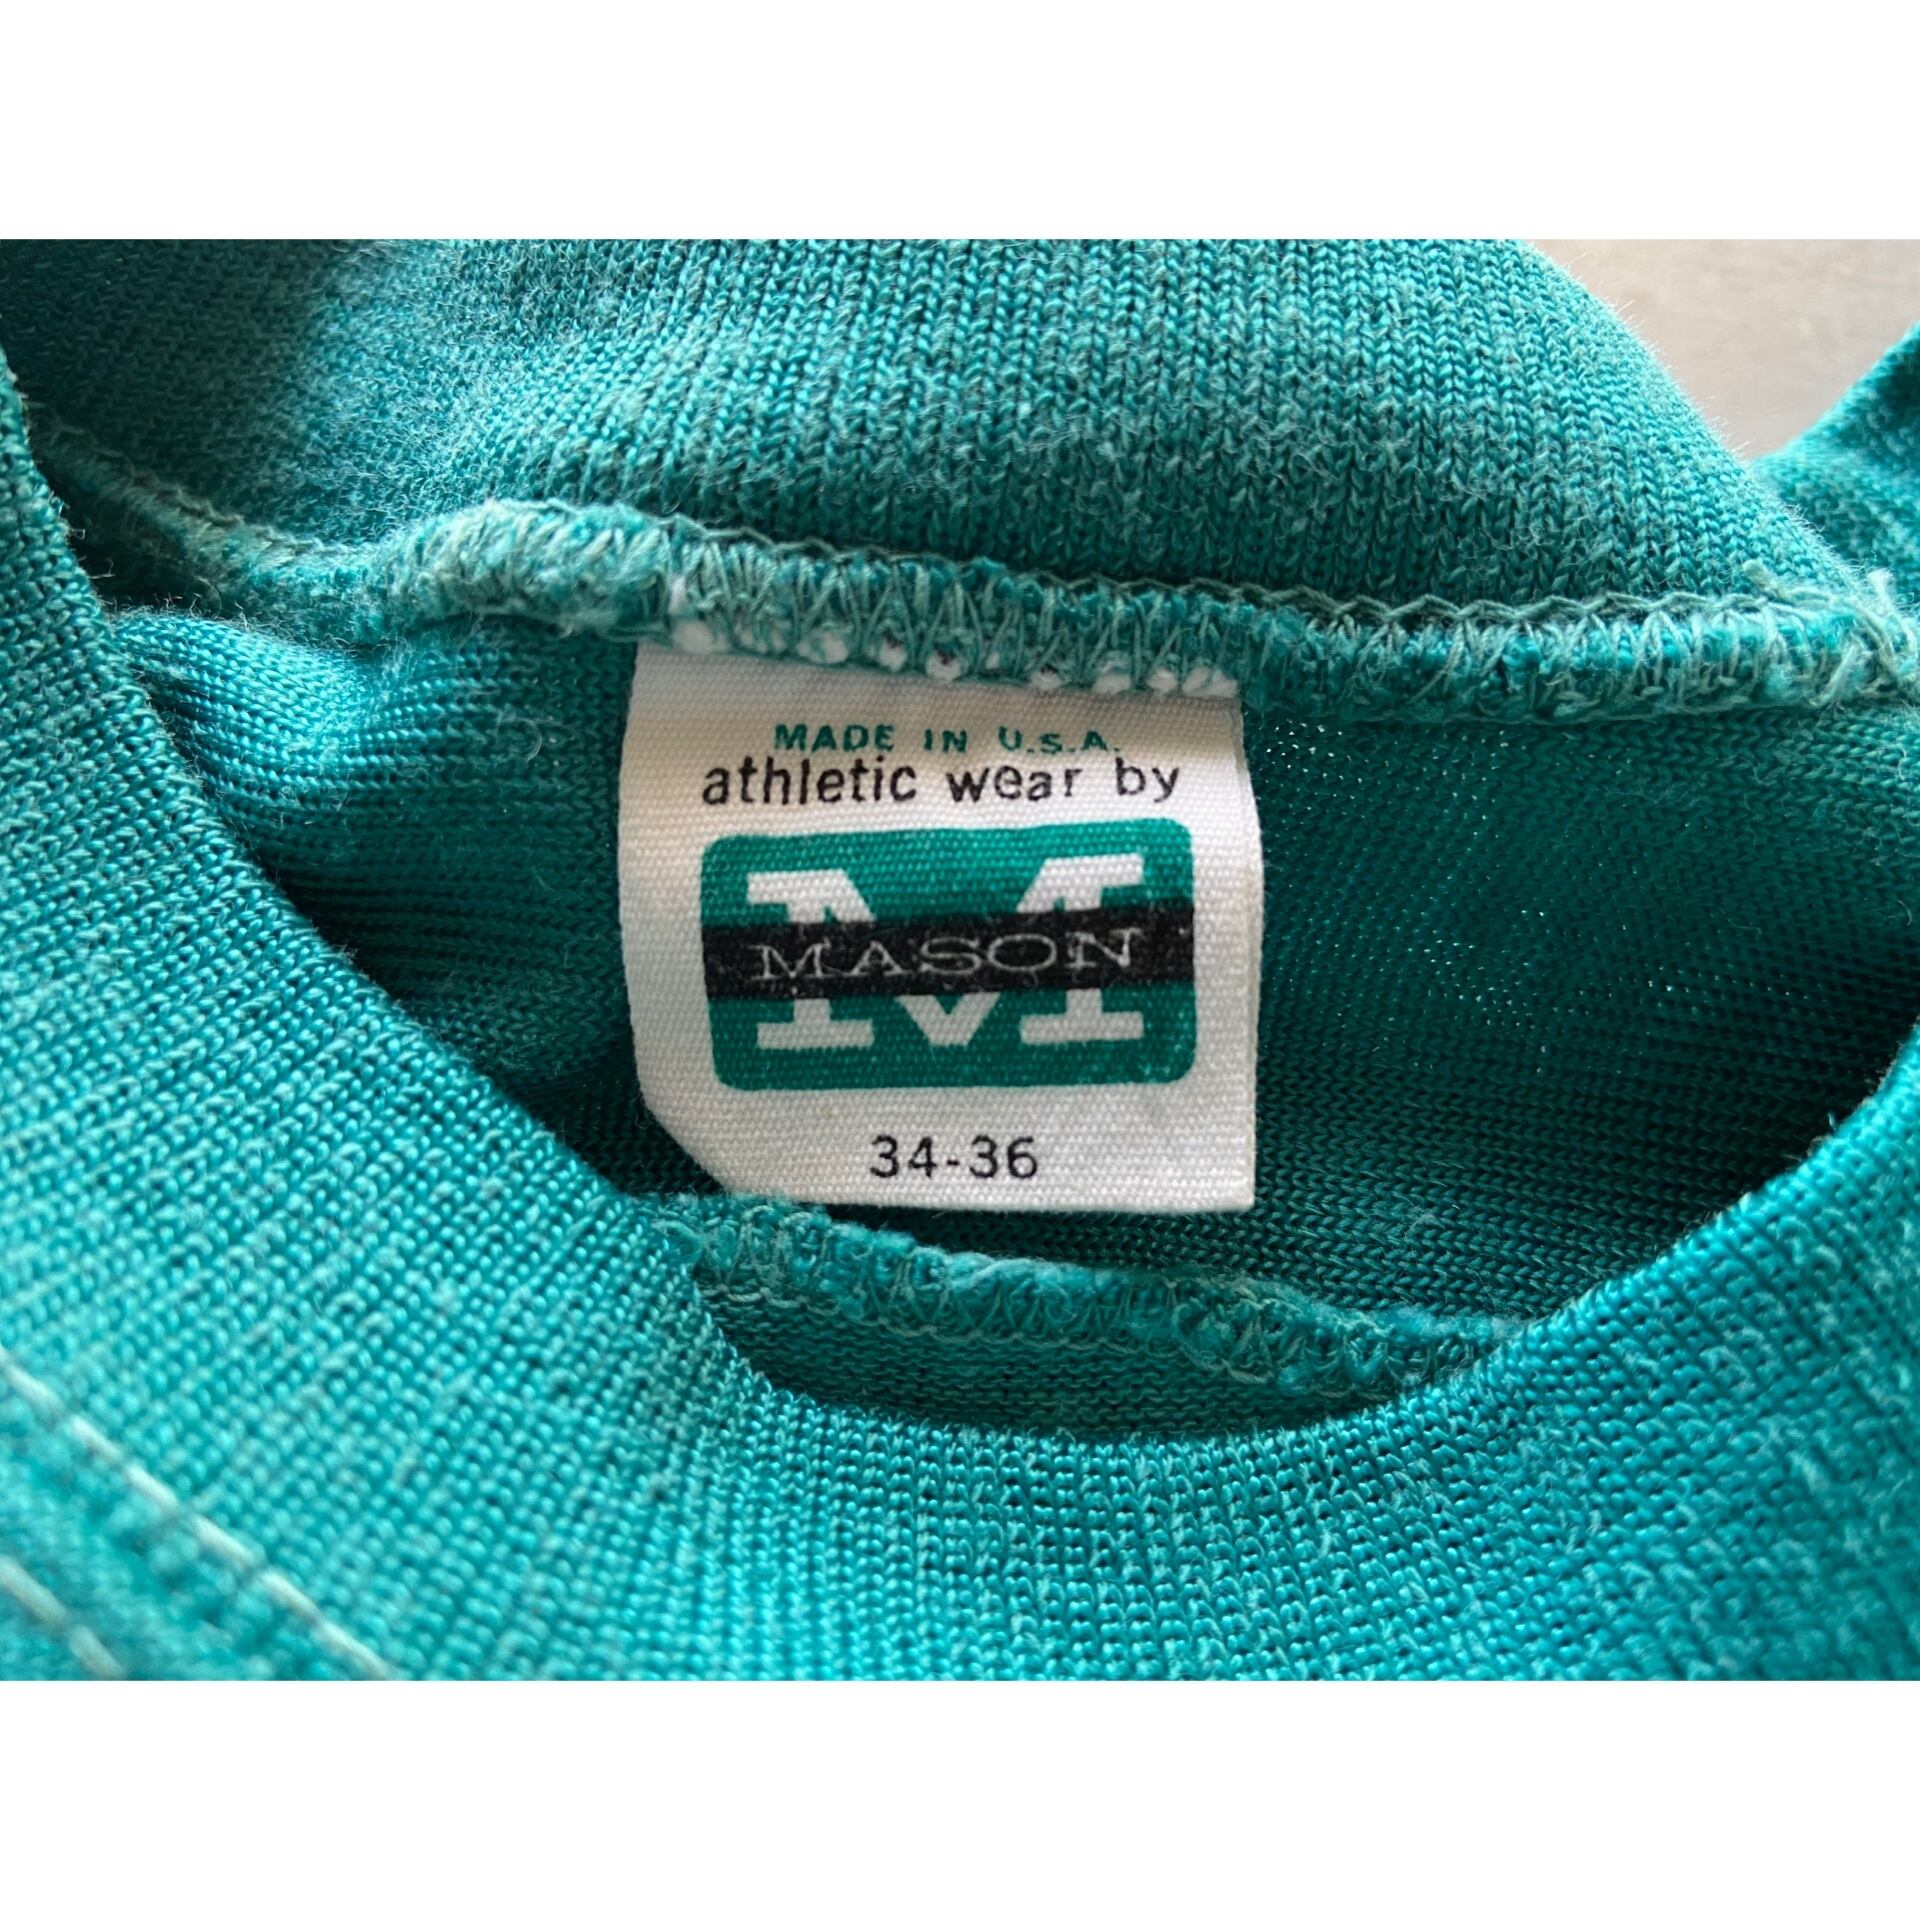 60s 70s ヴィンテージTシャツ made in USA